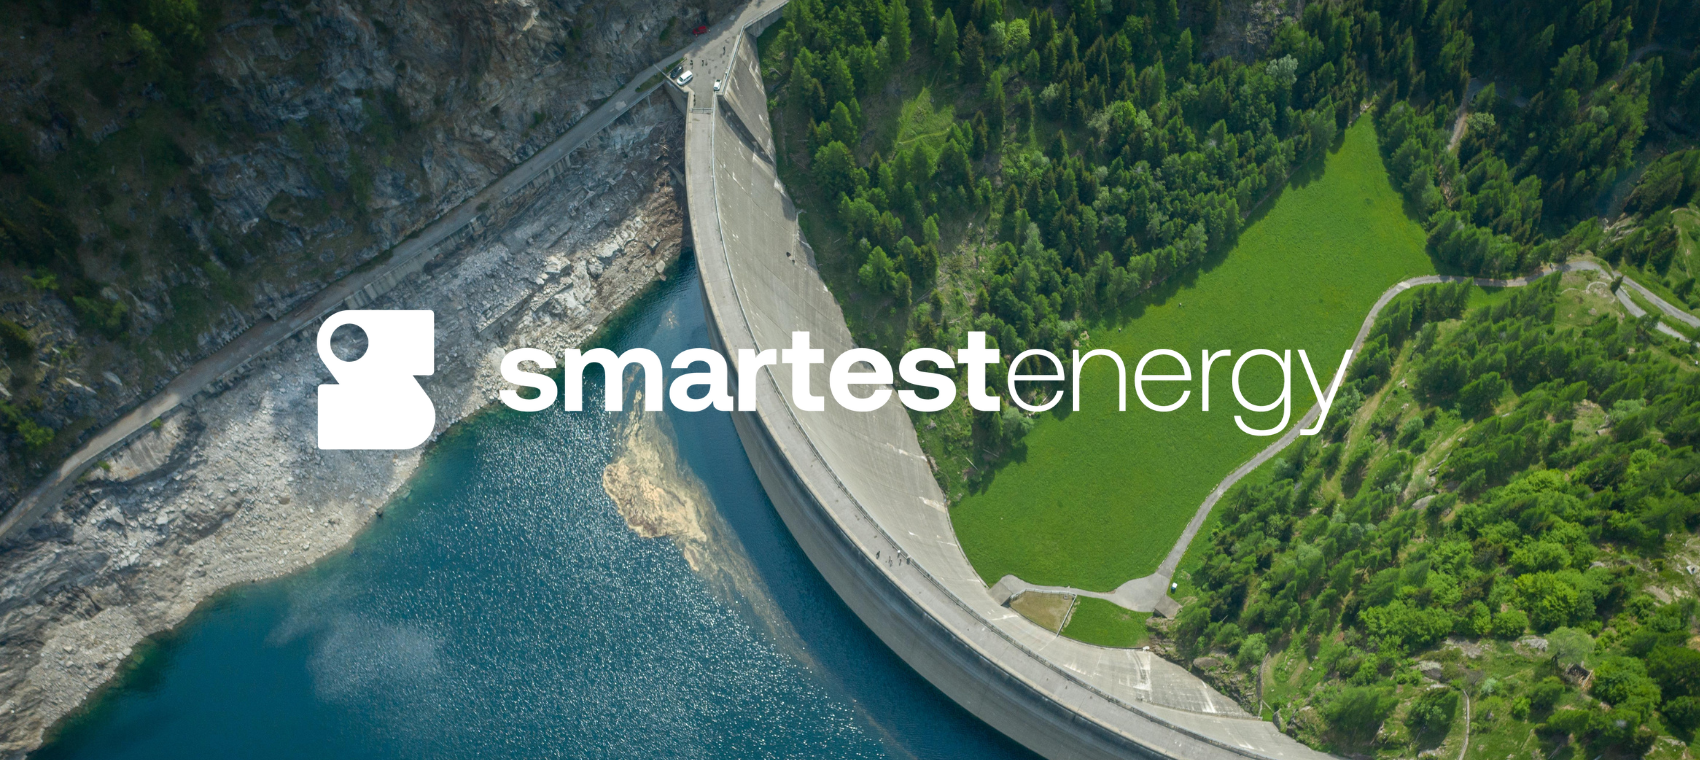 SmartestEnergy’s Making the Switch to a New Brand Identity